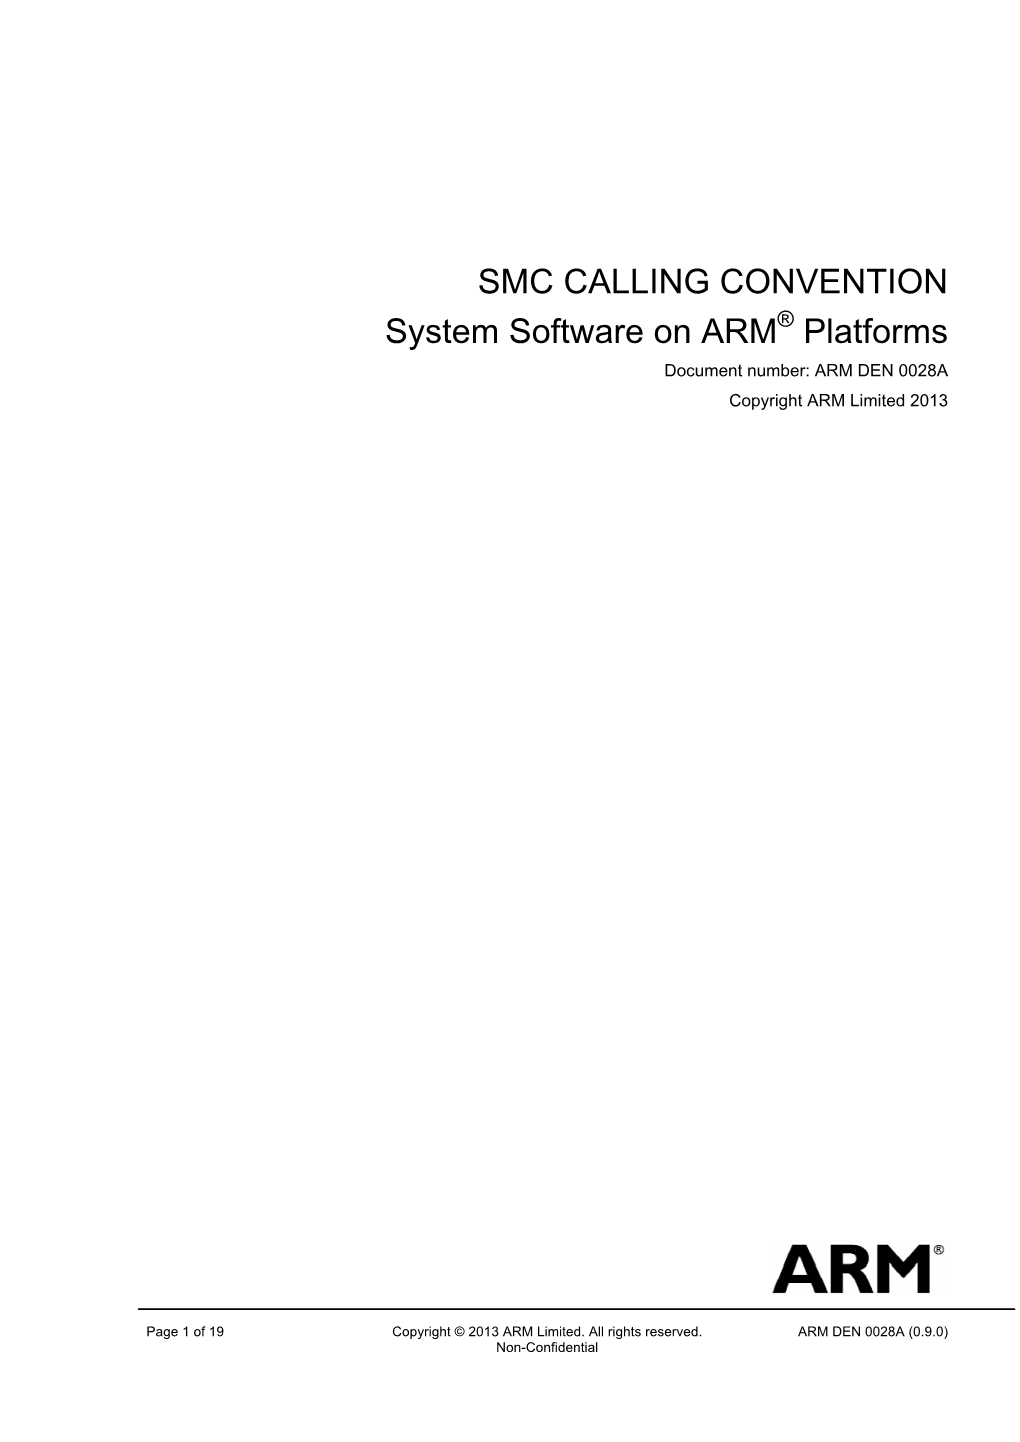 SMC CALLING CONVENTION System Software on ARM® Platforms Document Number: ARM DEN 0028A Copyright ARM Limited 2013